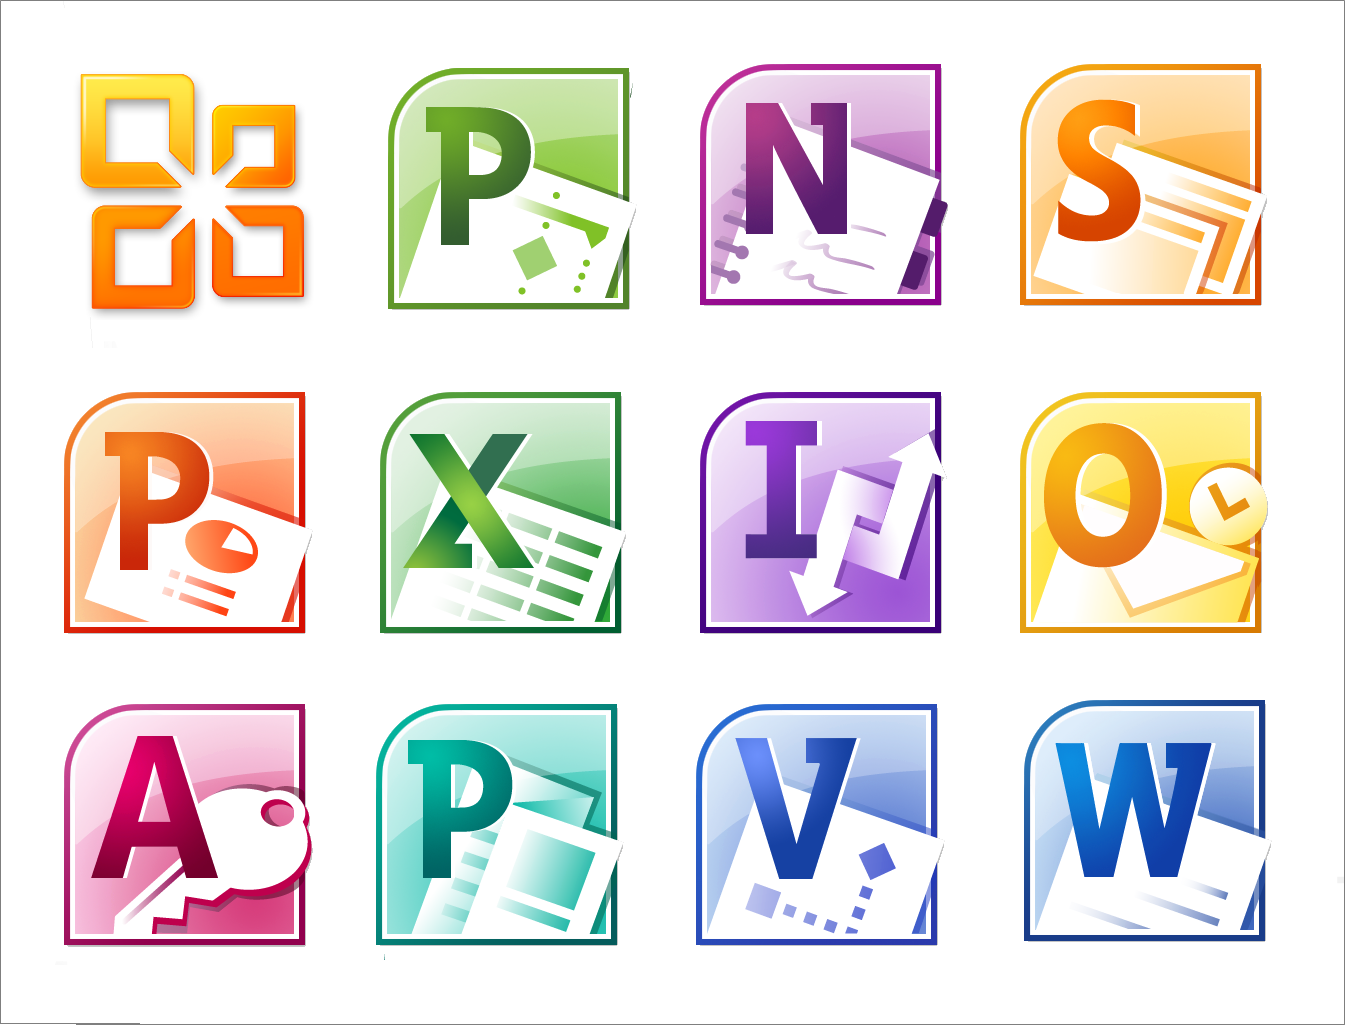 Download Free Clipart Images From Microsoft Office - Microsoft Office 2010 Professional Plus 32/64bit Product (1345x1025)